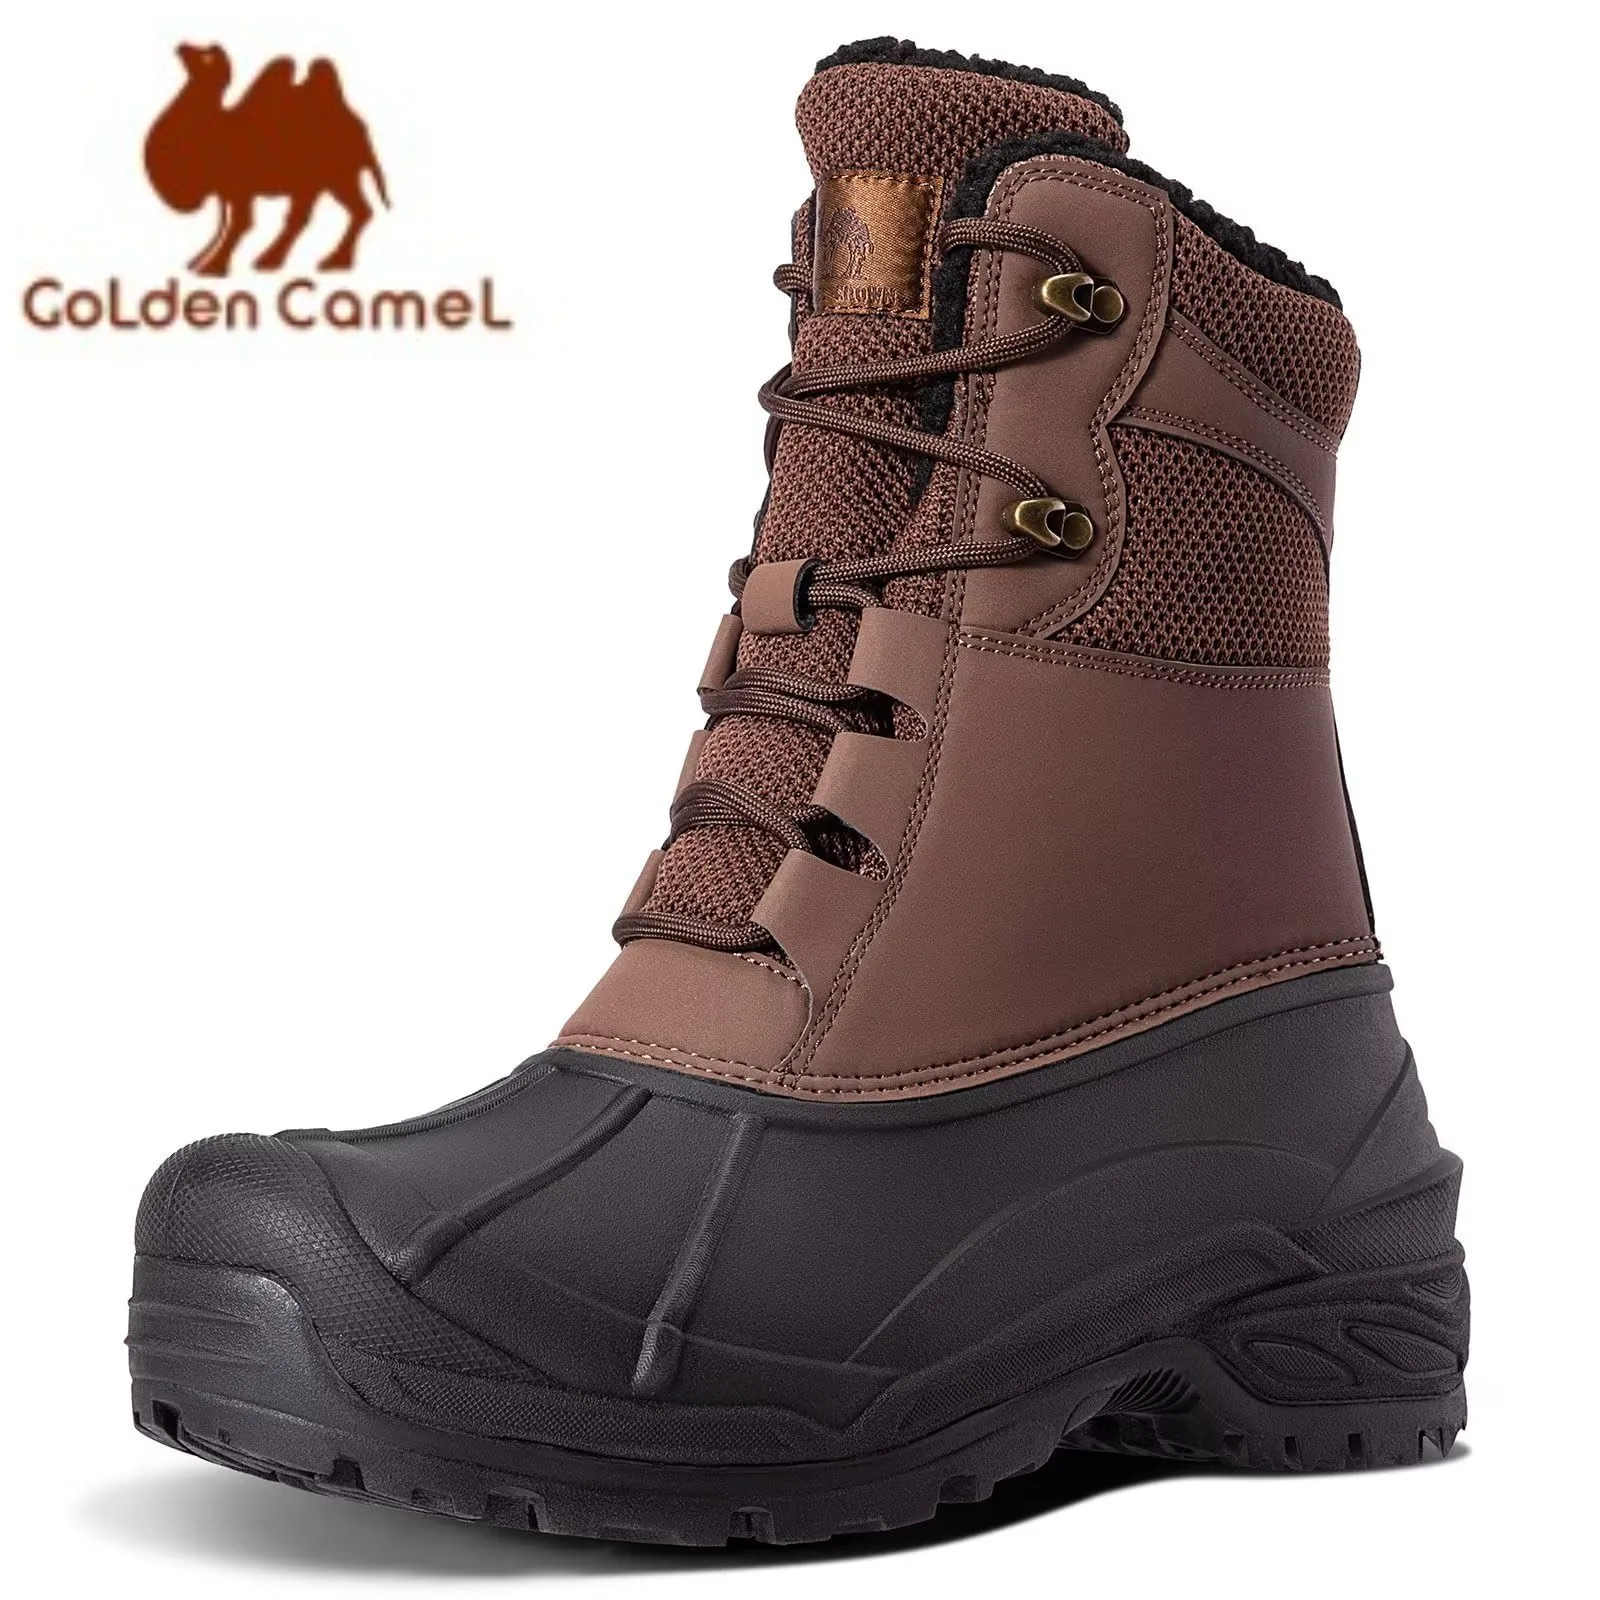 

GOLDEN CAMEL Hiking Shoes Waterproof Men's Snow Boots Insulated Winter Boots Durable Non-Slip Fur Warm Climbing Shoes for Men